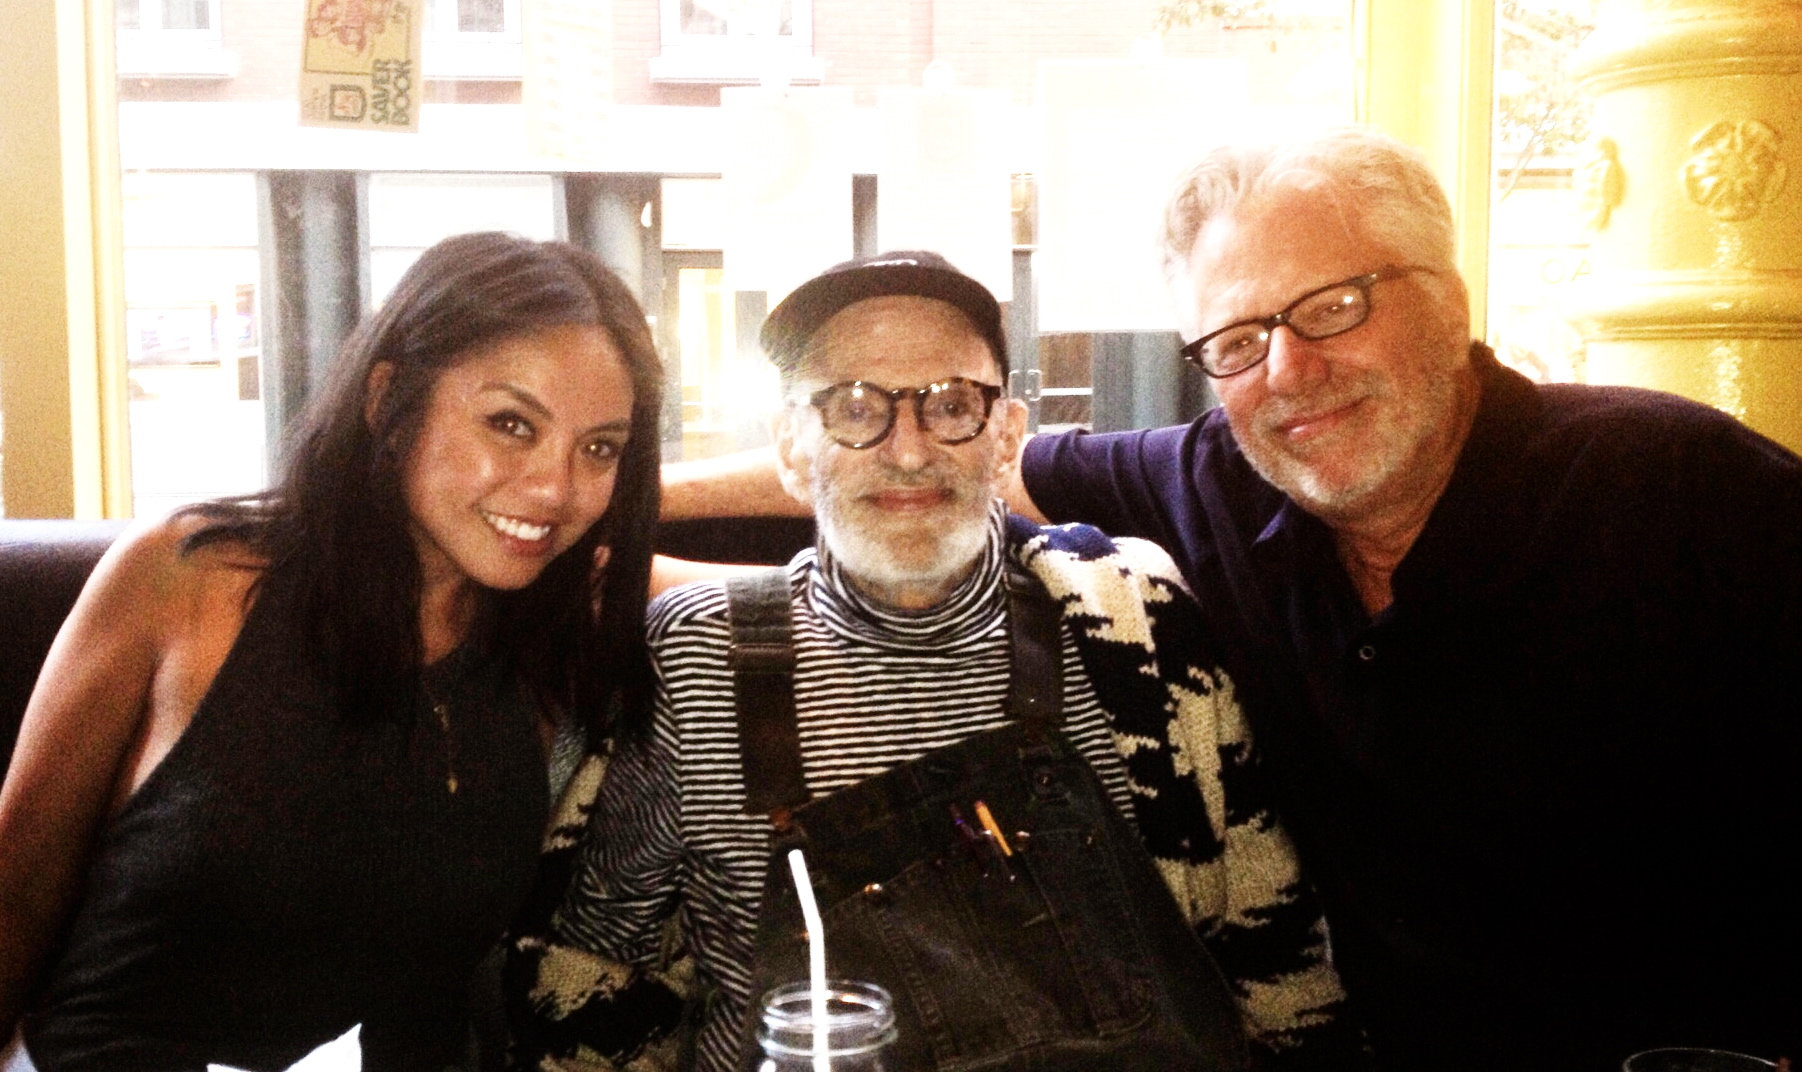 Gladys Murphy, Larry Kramer, Geof Bartz at wrap party for 